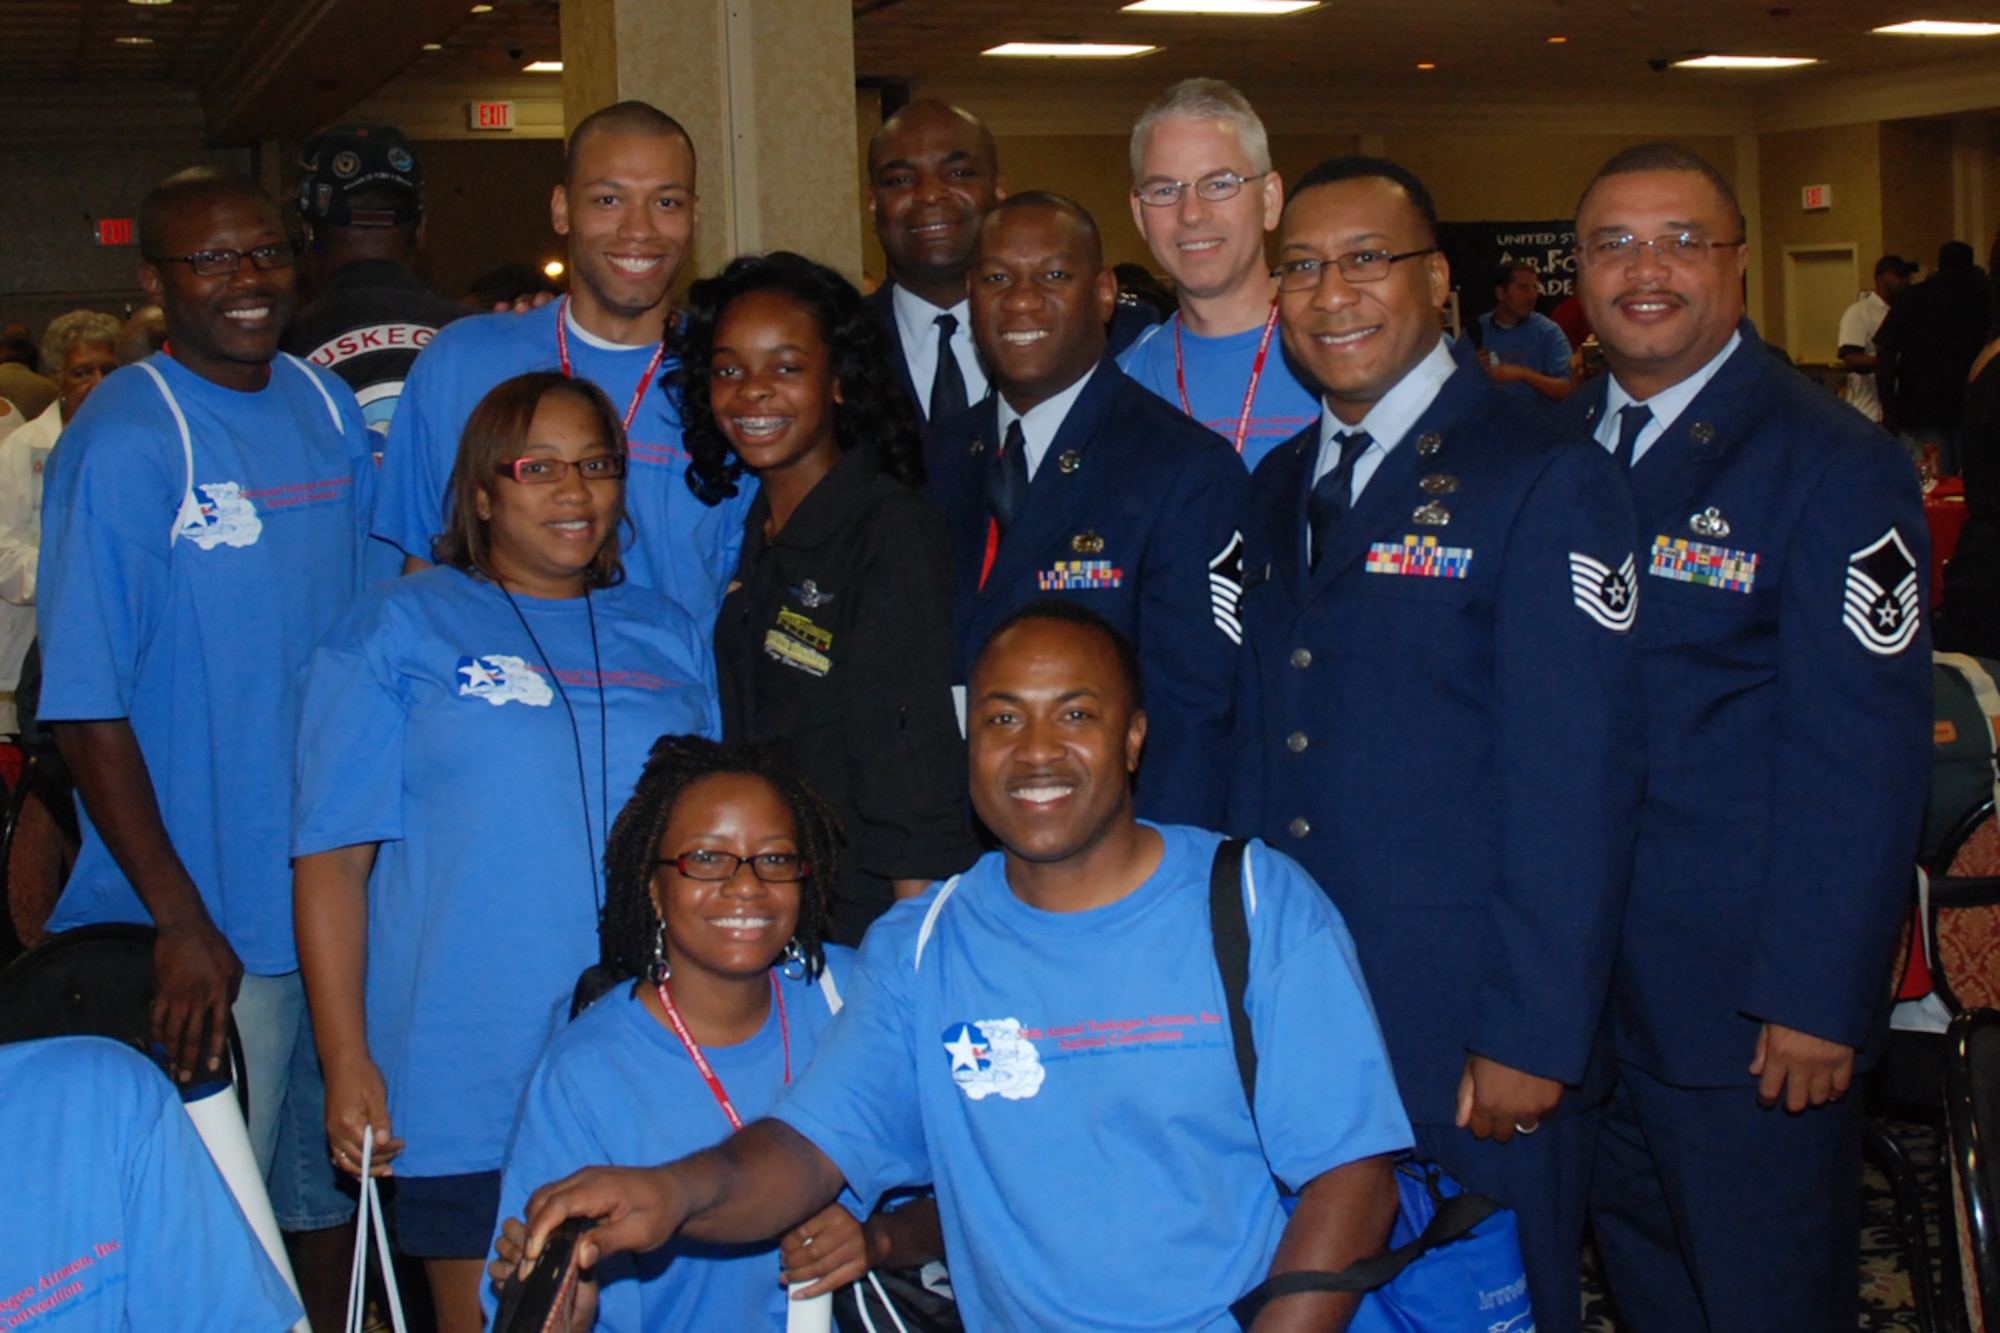 Members of the 94th Airlift Wing meet 15-year-old Kimberly Anyadike (in black) at the 2009 Tuskegee Airman National Convention student luncheon Aug. 8 in Las Vegas, Nev. Kimberly holds the record as the youngest African-American female to fly a plane across the United States solo.